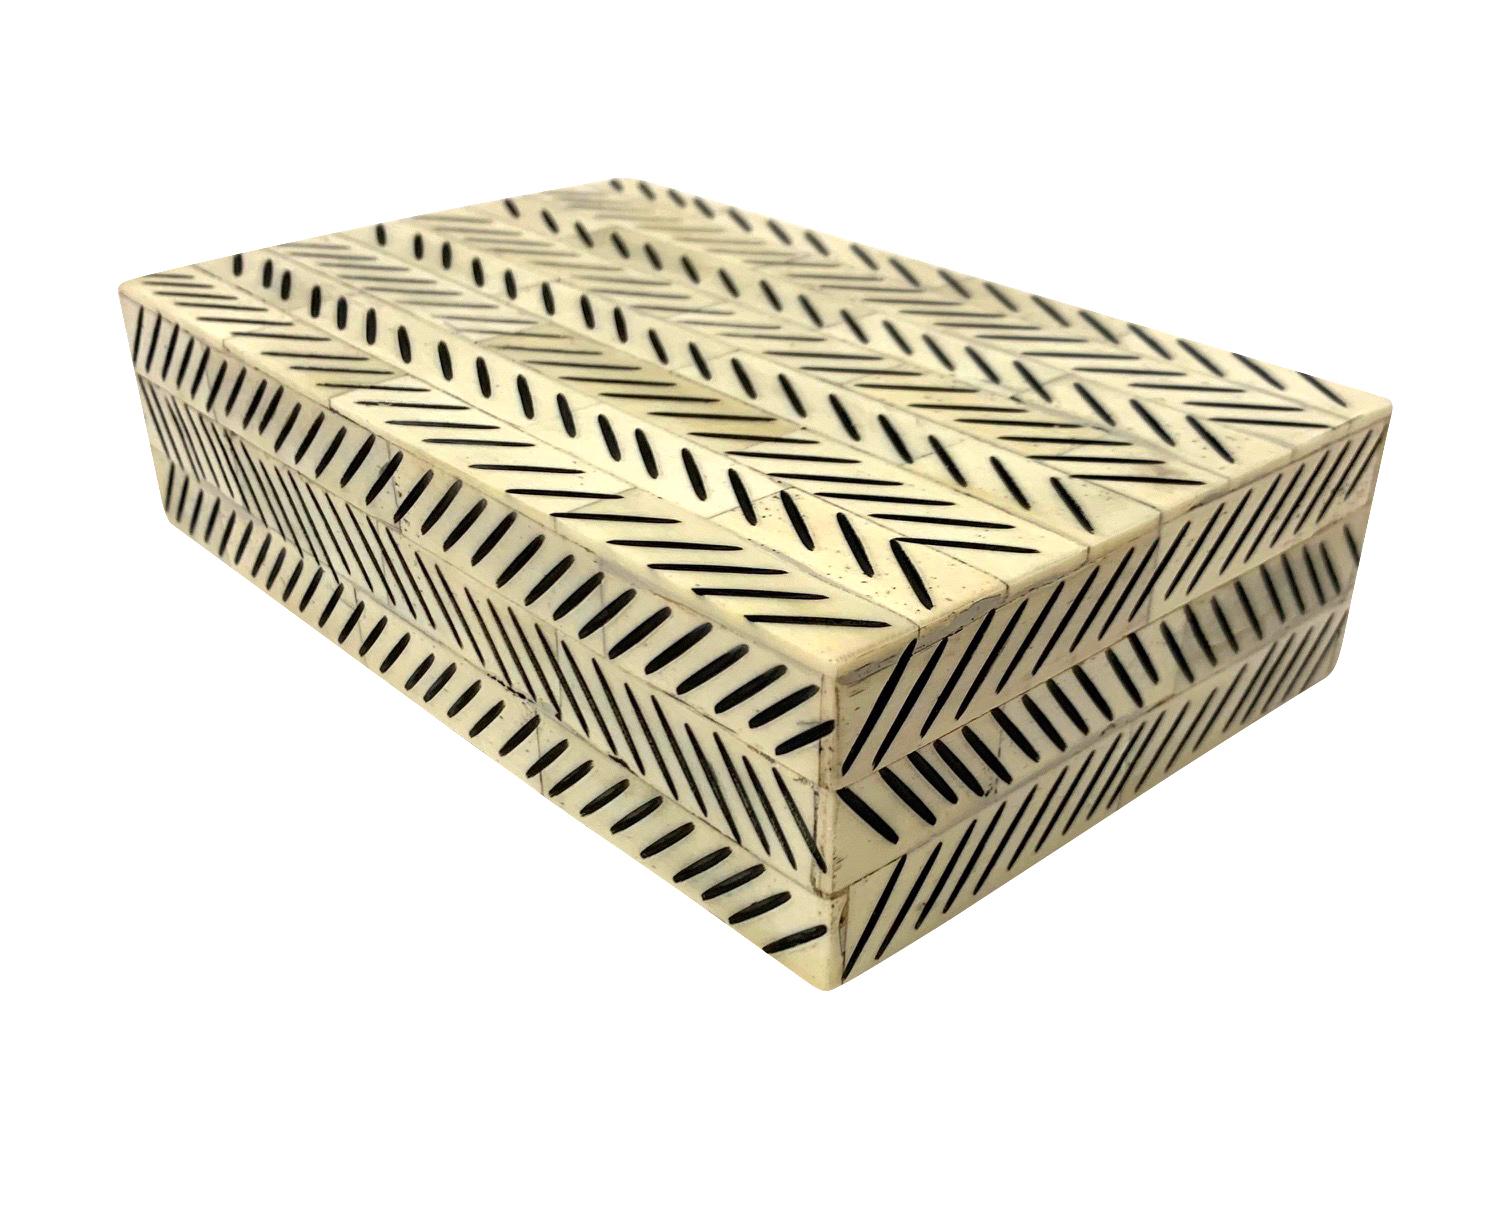 Contemporary Indian lidded bone box with etched chevron pattern design.
Part of a large collection of bone boxes